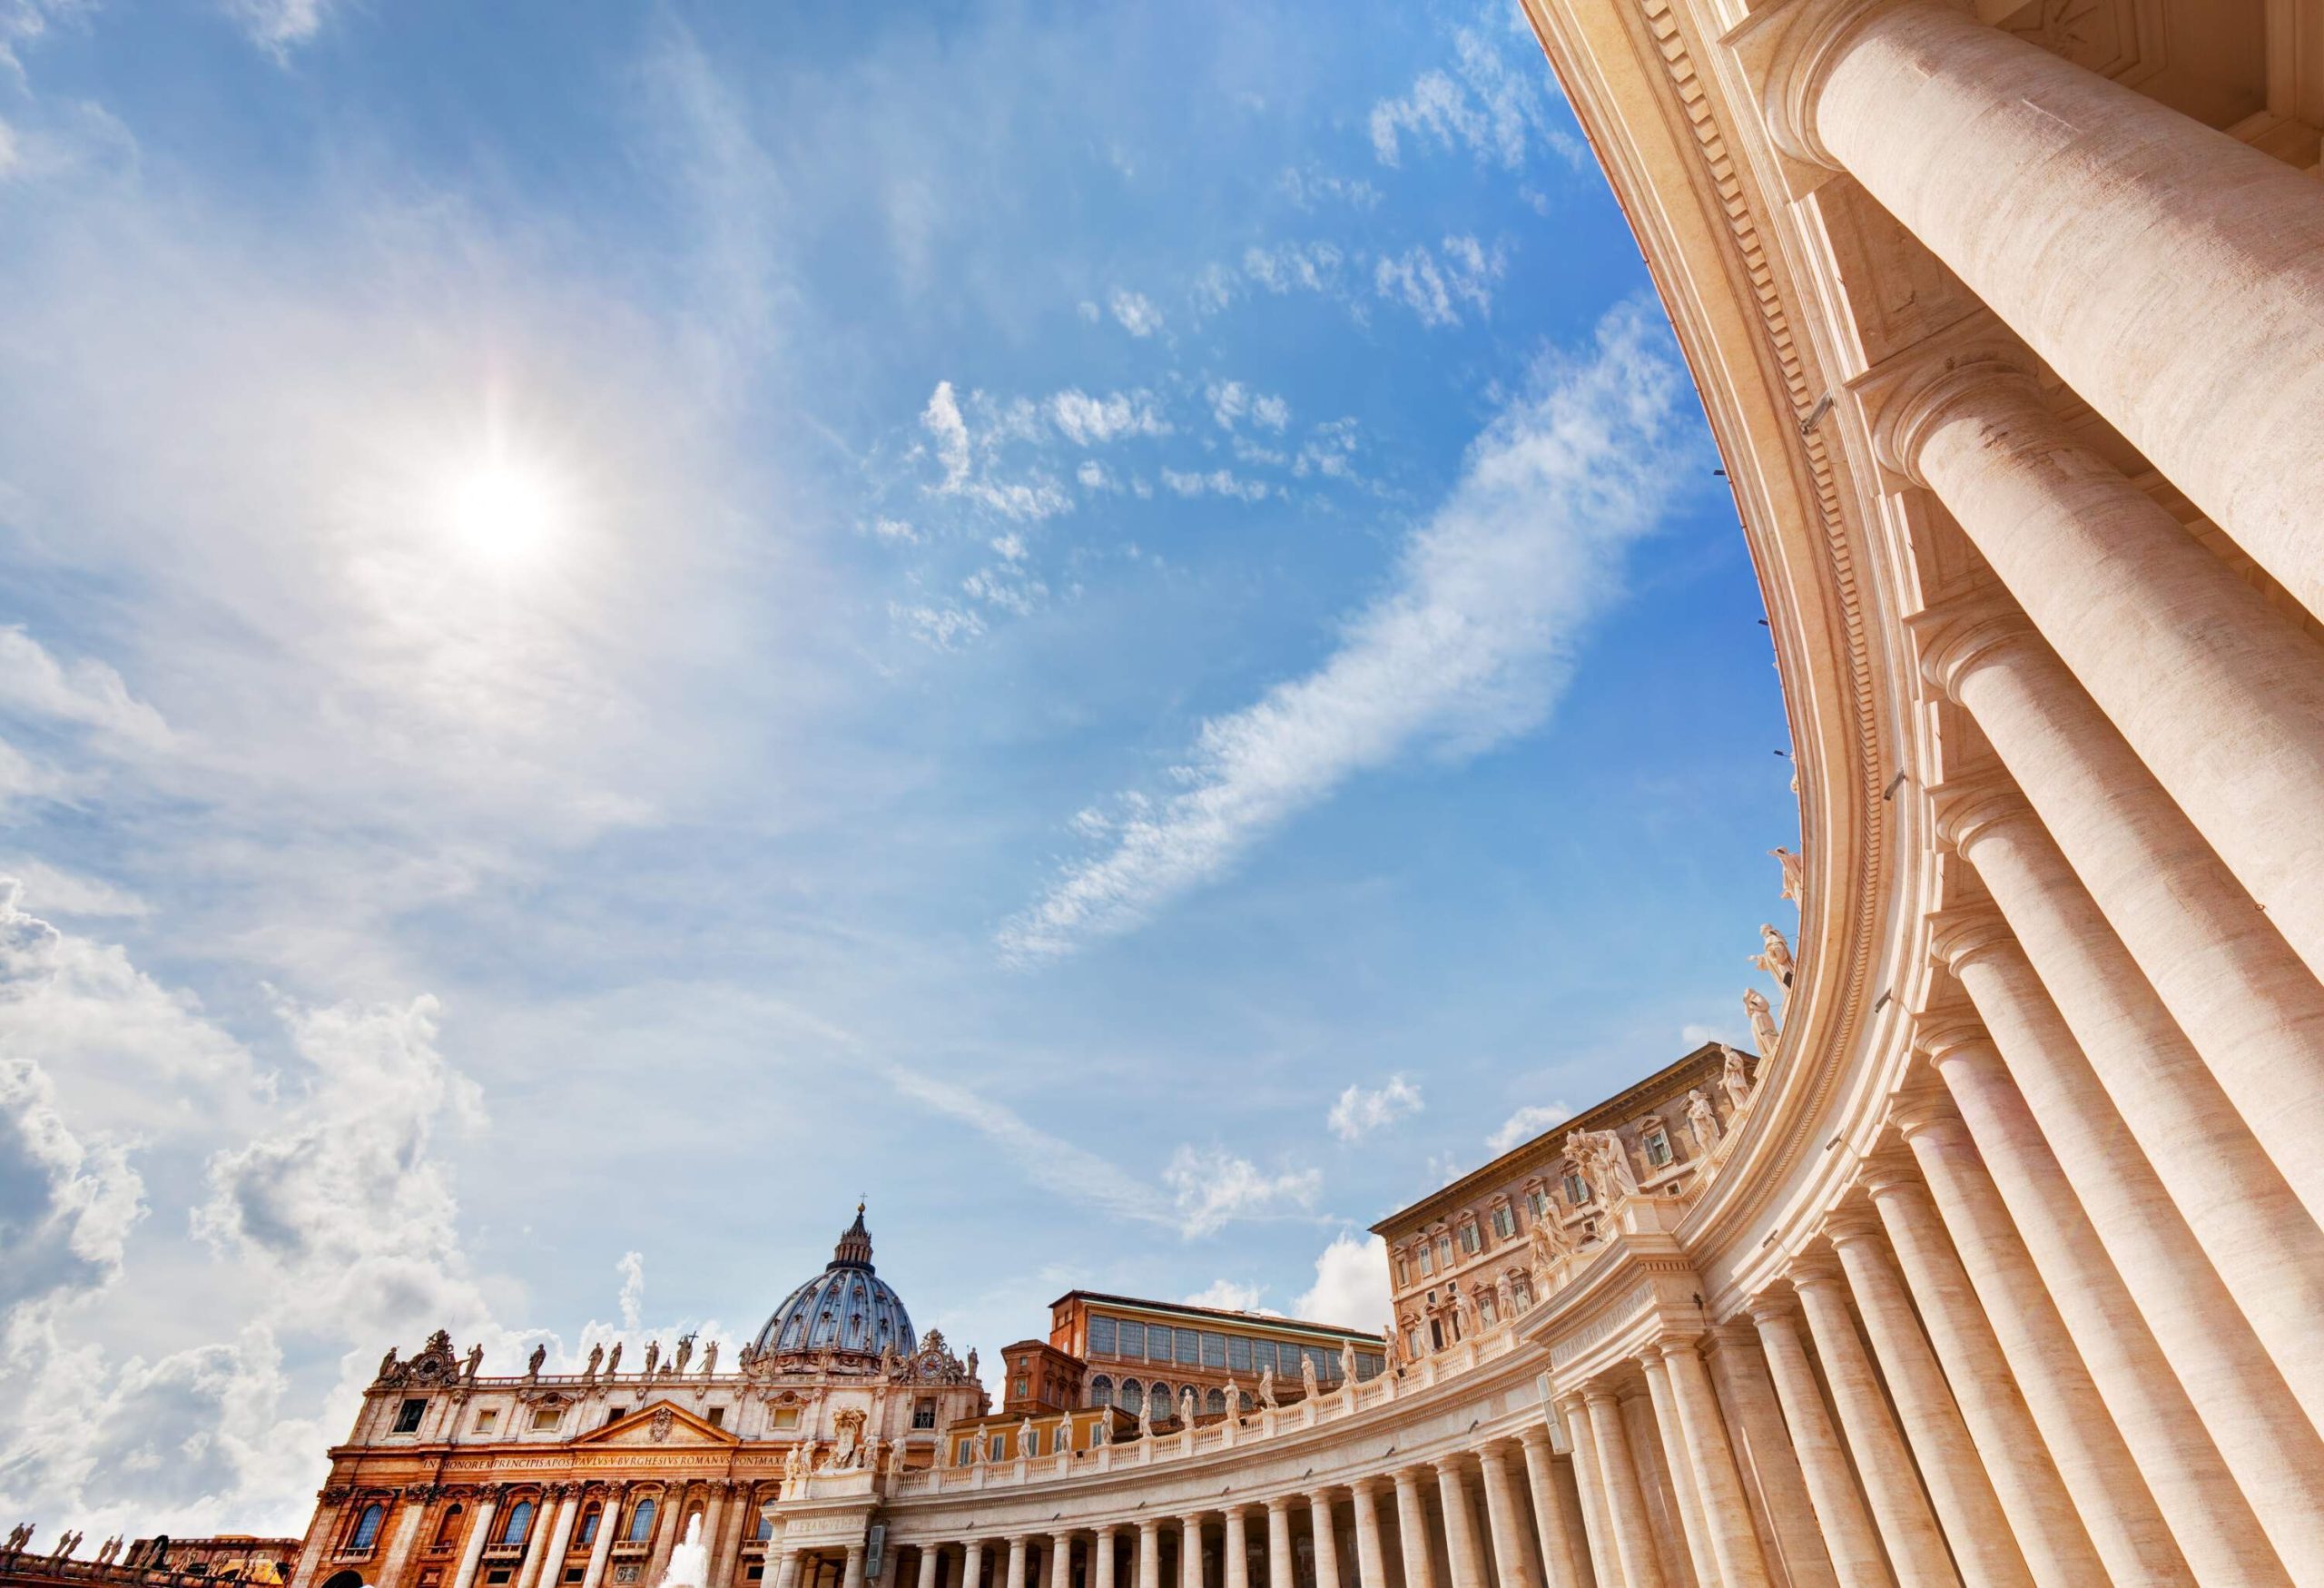 The curved colonnade and the basilica in St. Peter's Square under the bright light of the sun.